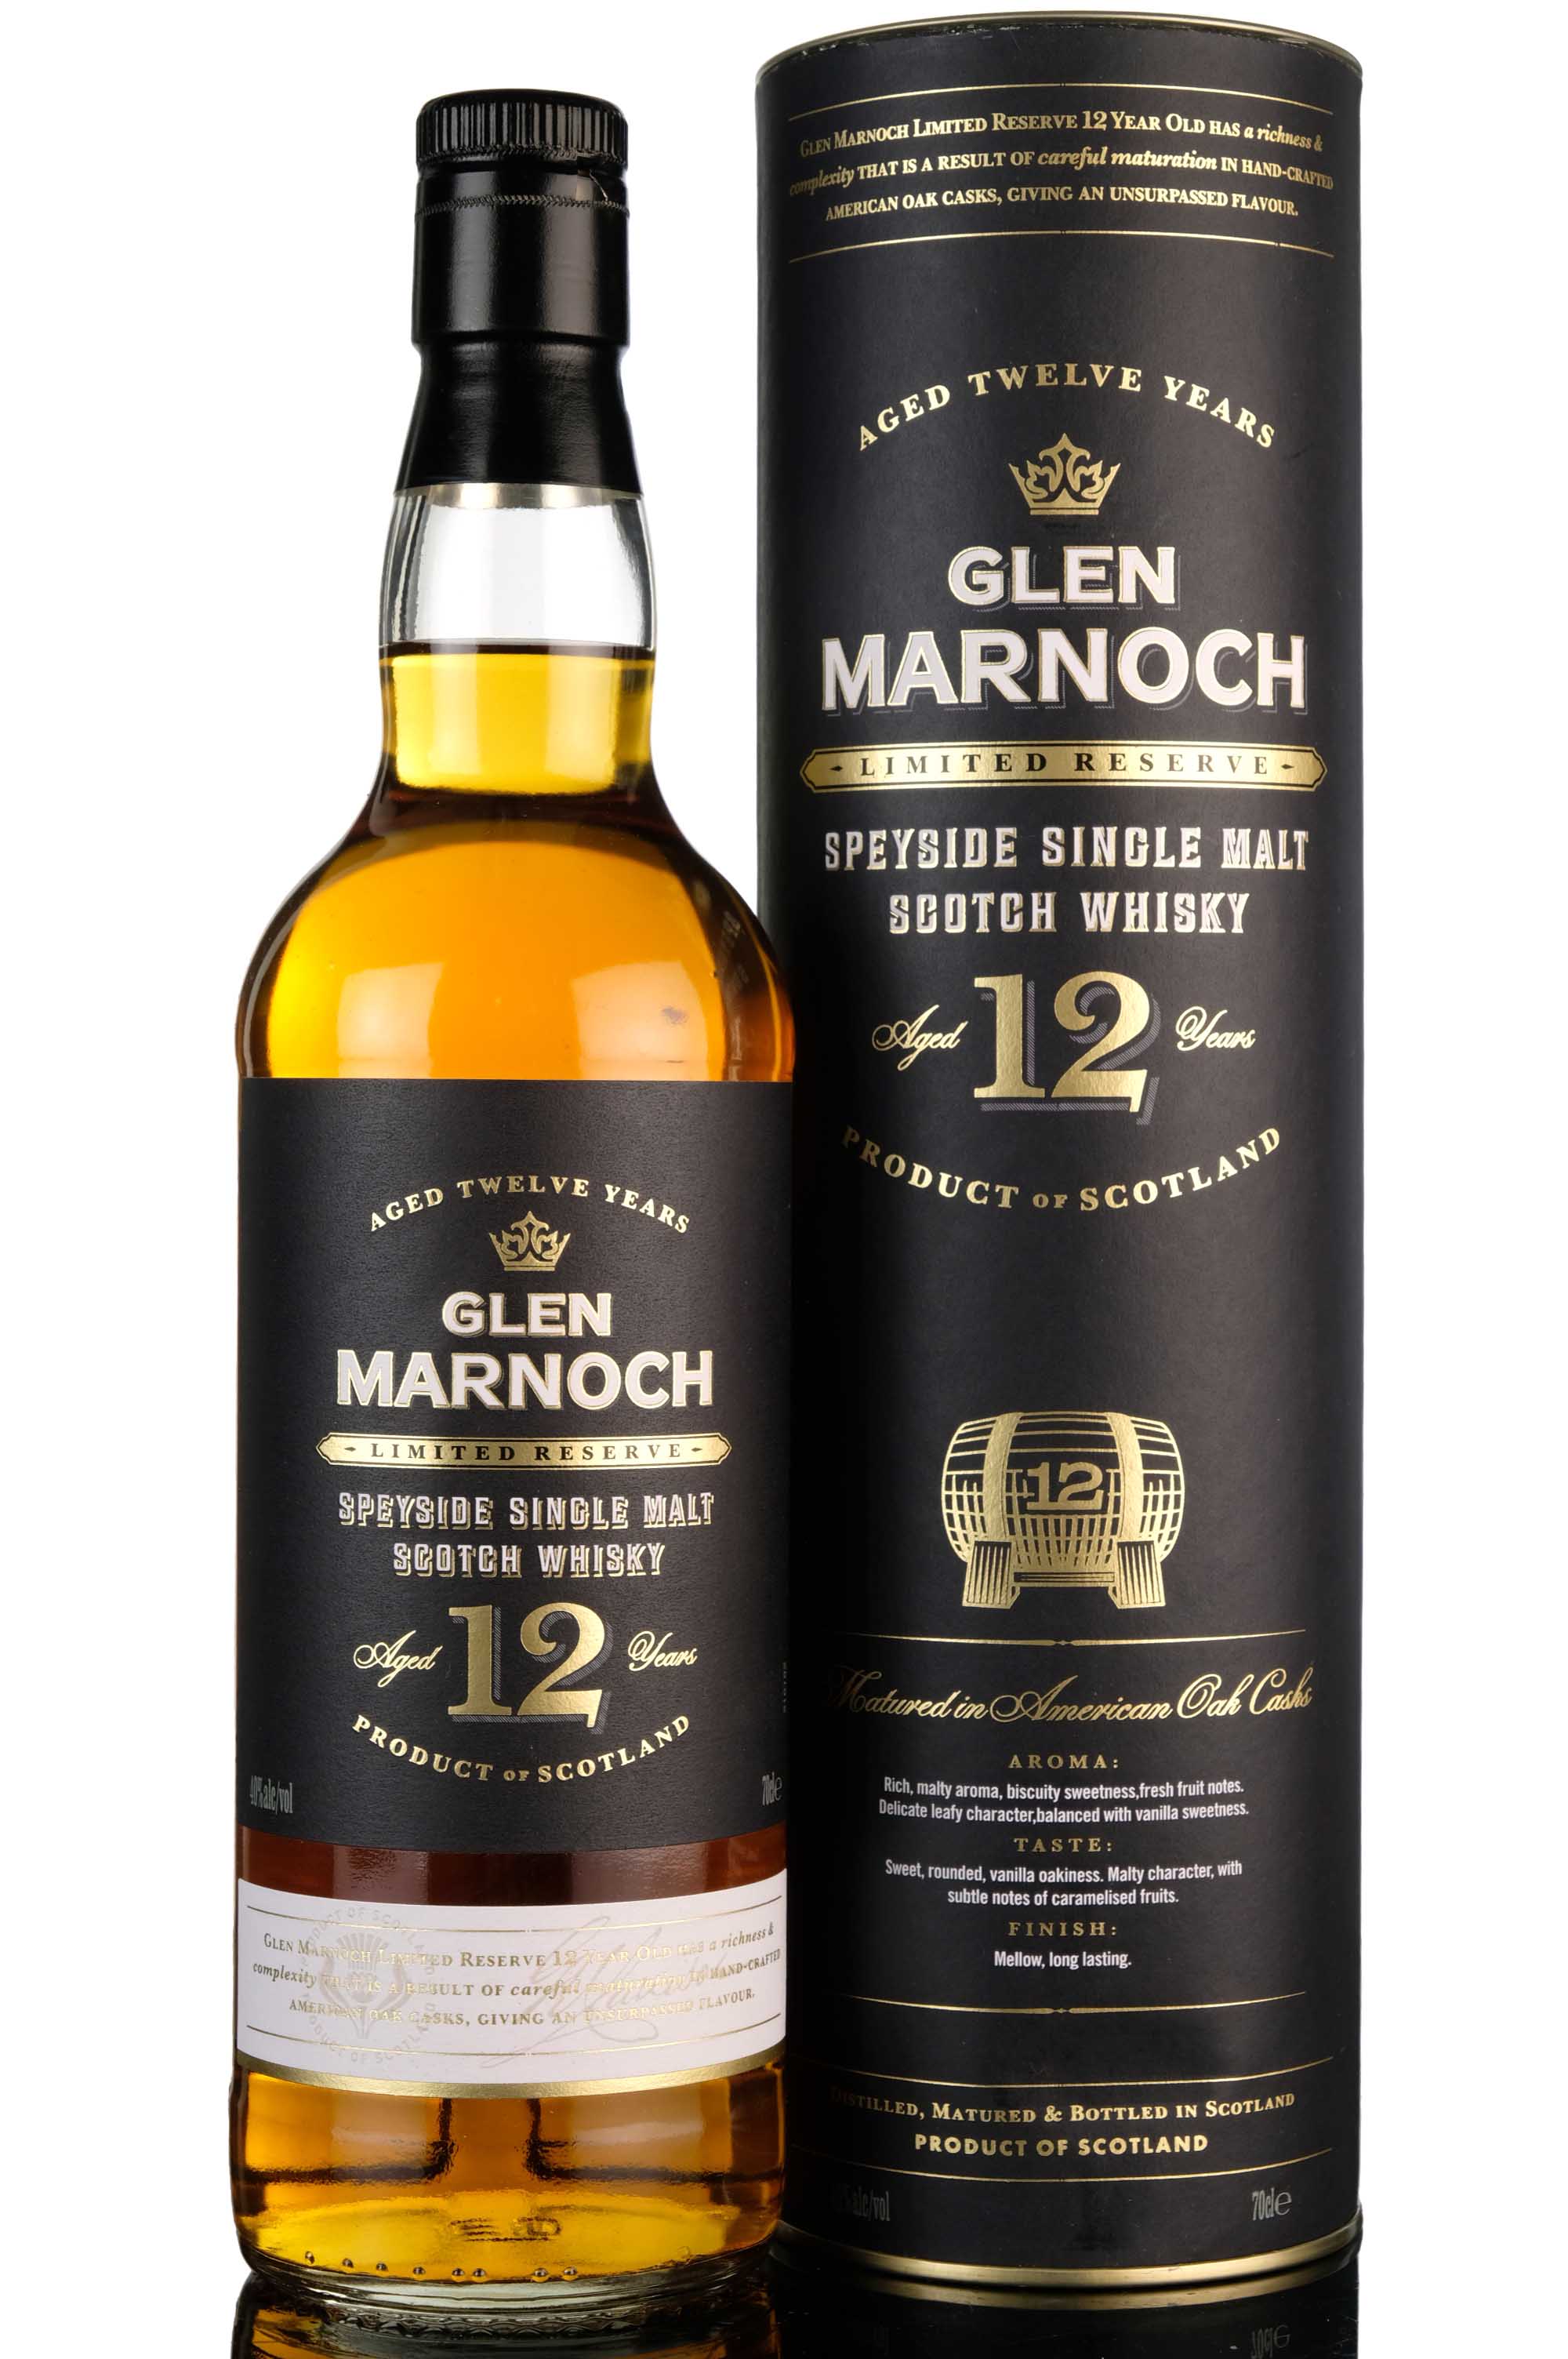 Glen Marnoch 12 Year Old - Limited Reserve